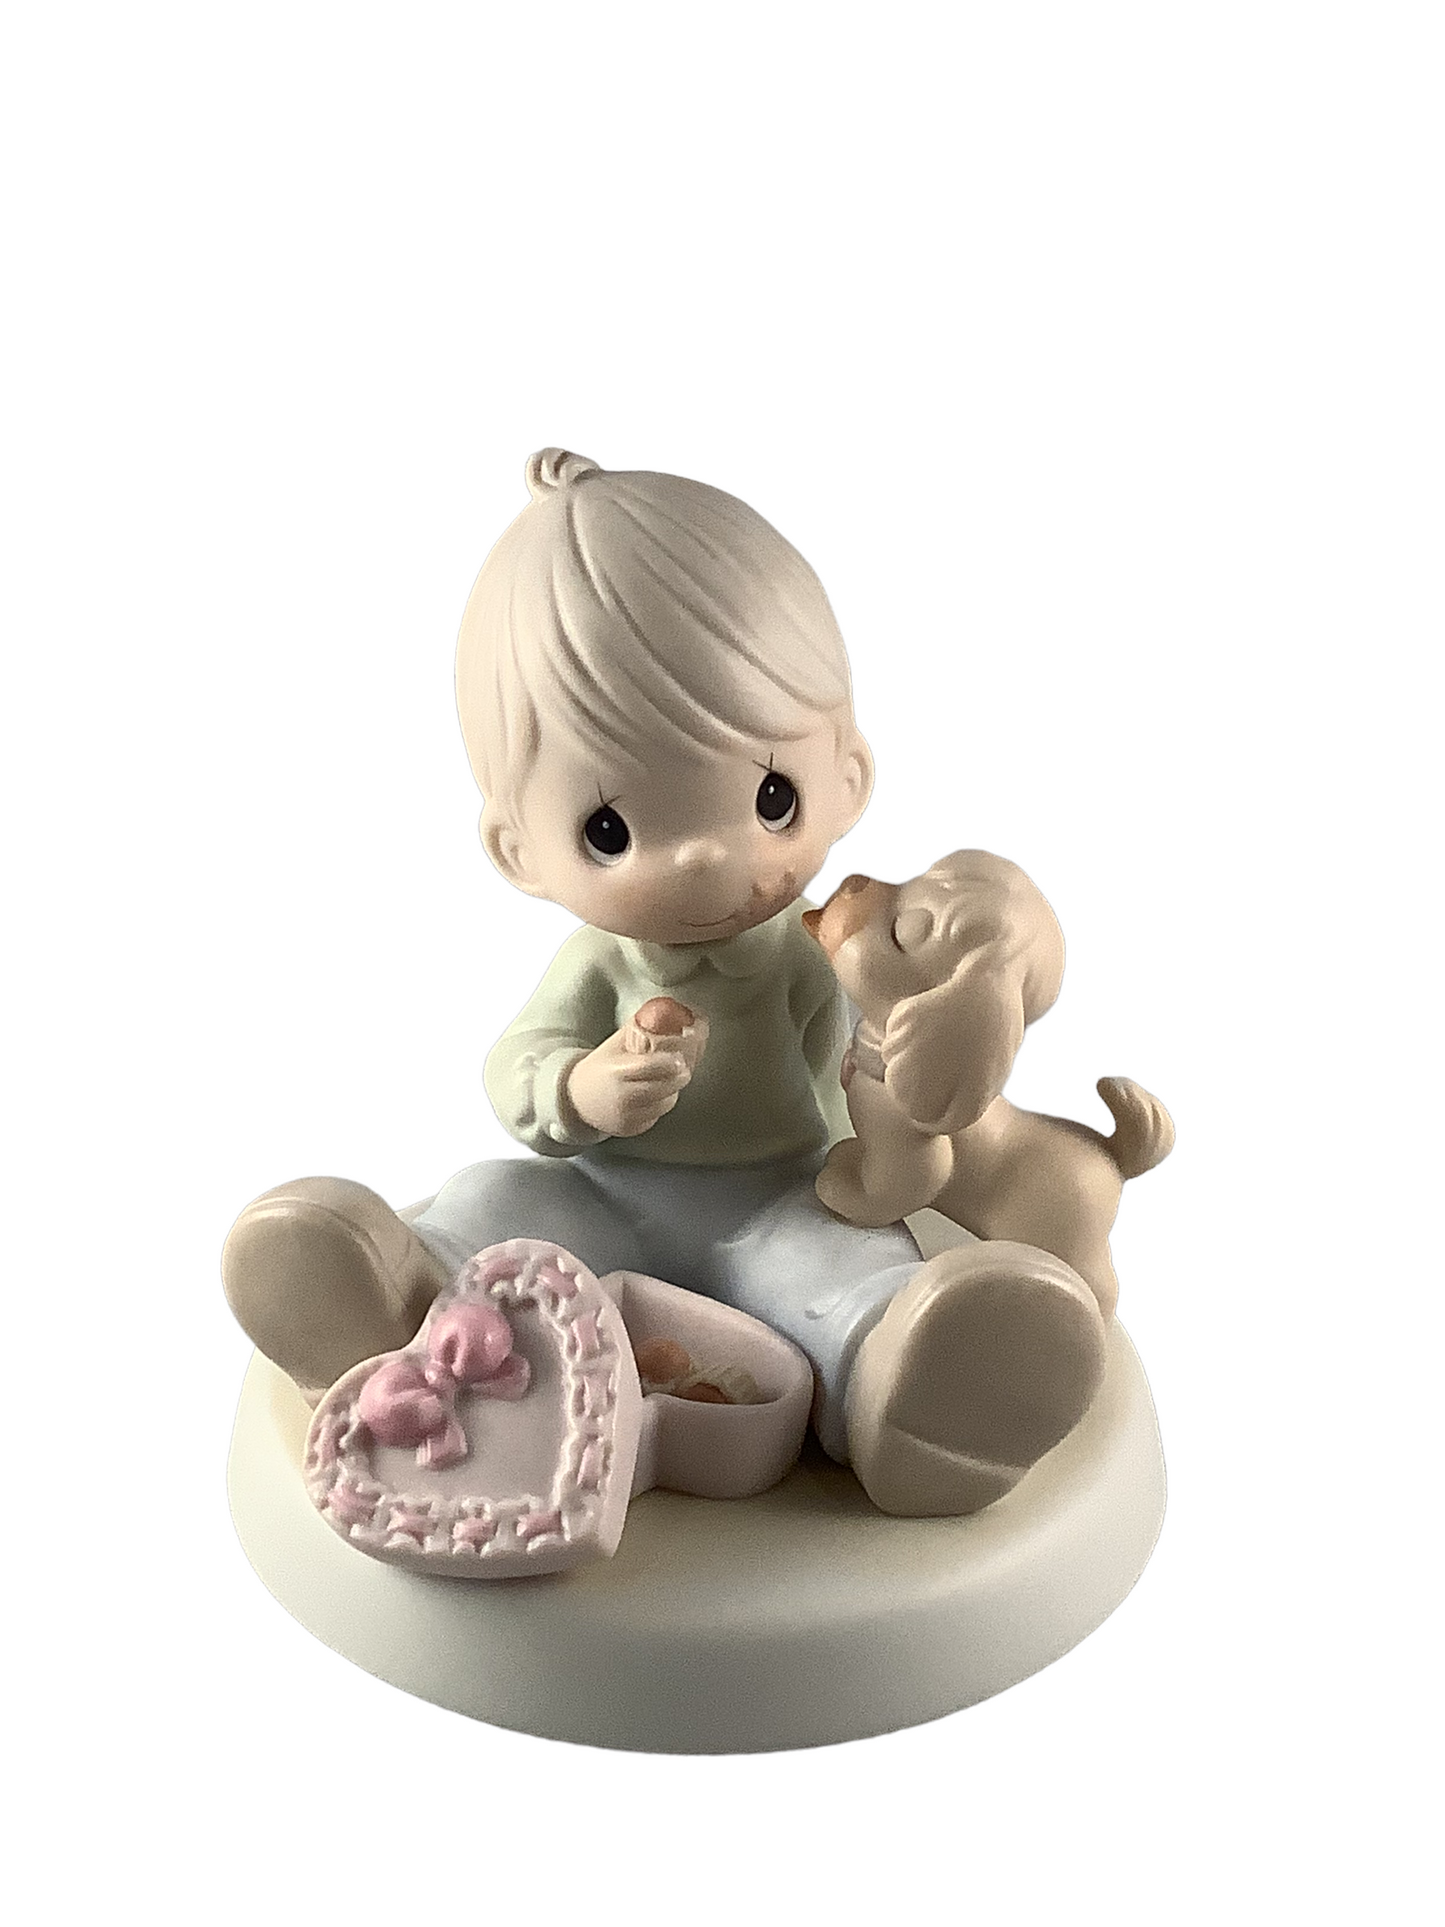 Sharing Sweet Moments Together - Precious Moment Figurine